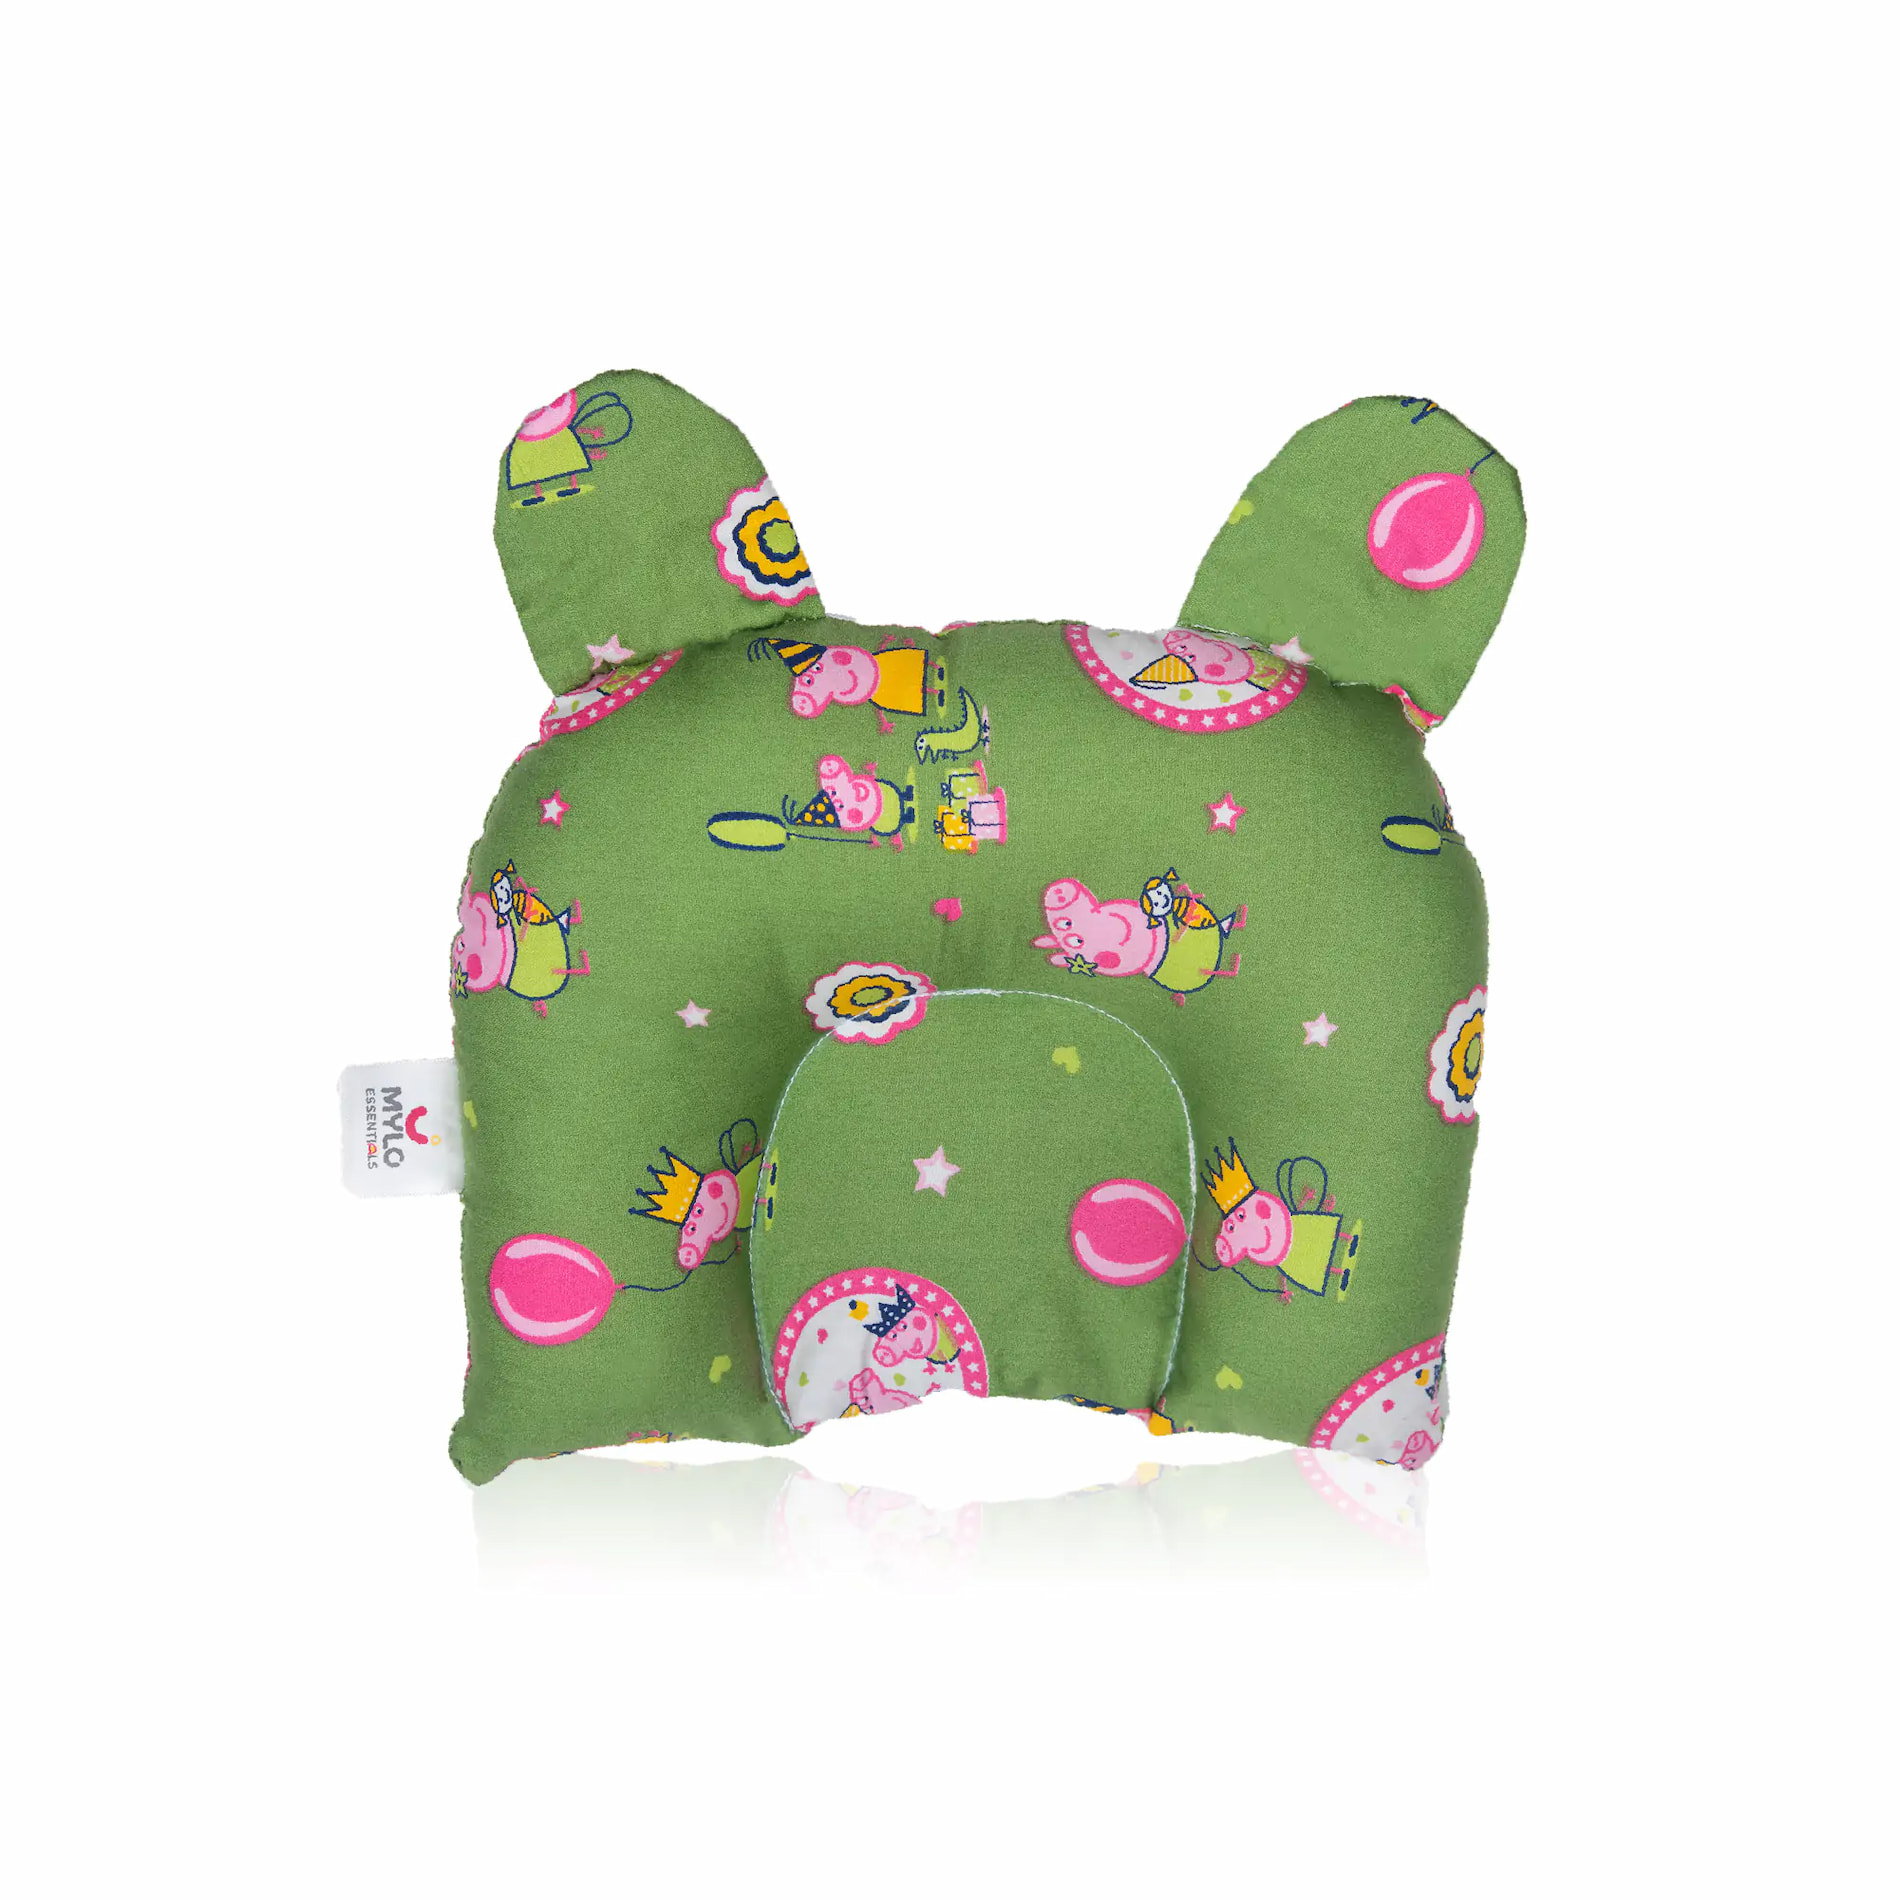 Mylo Baby Head Shaping Pillow with Mustard Seeds (0-12 Months) - Bunny Shaped (Peppa Party Green)